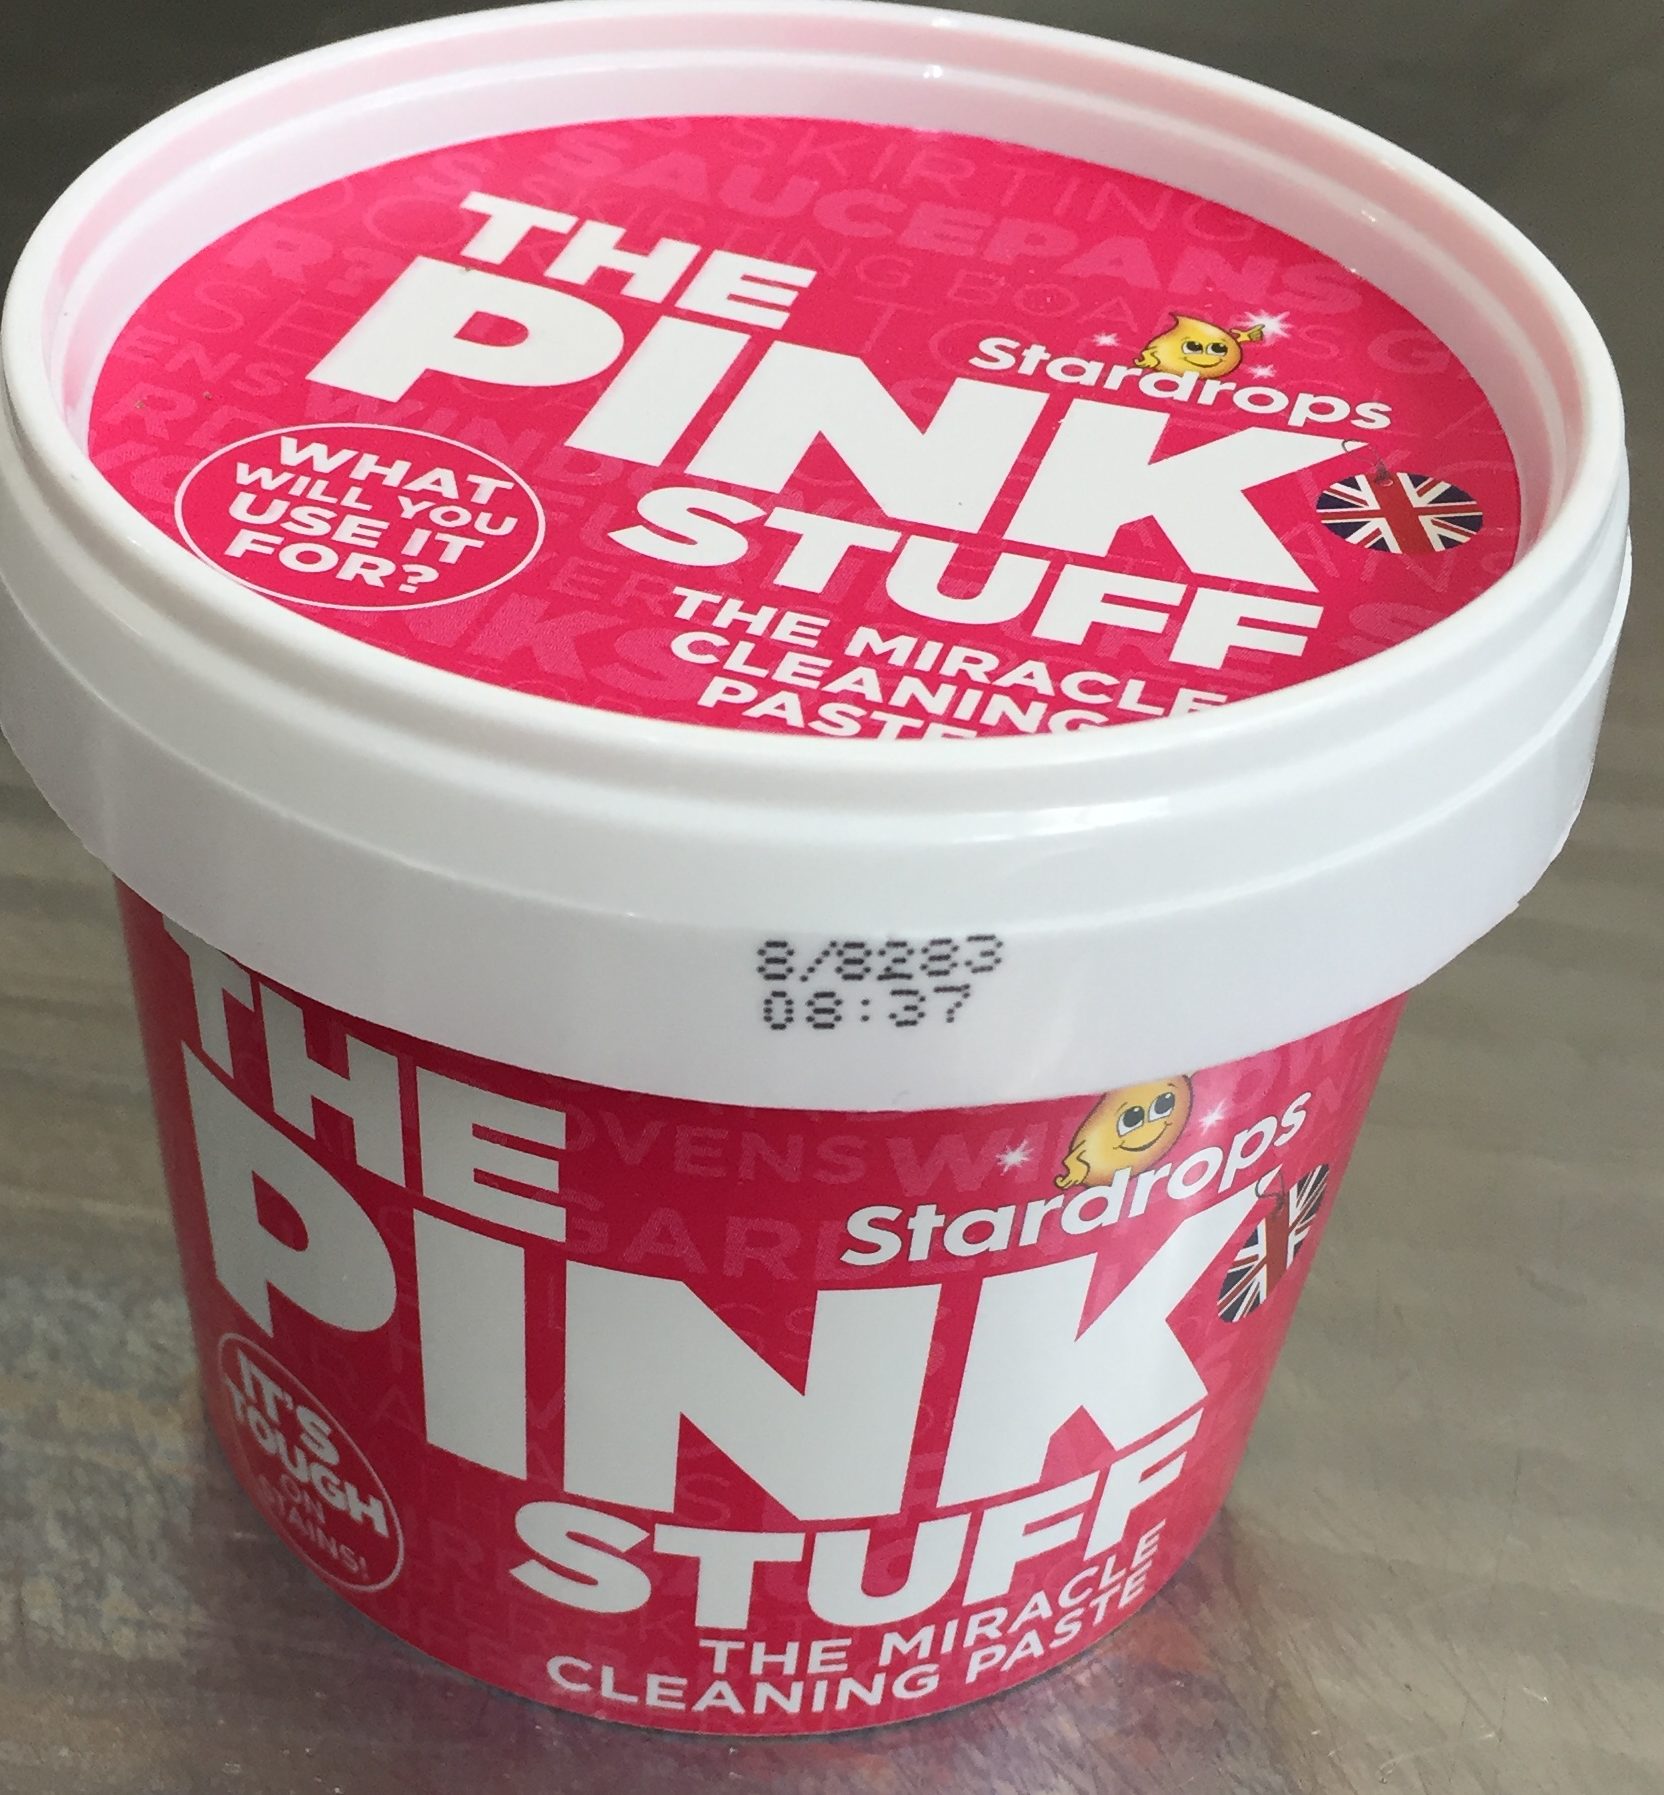 Why You Need to Try The Pink Stuff Miracle Cleaning Paste